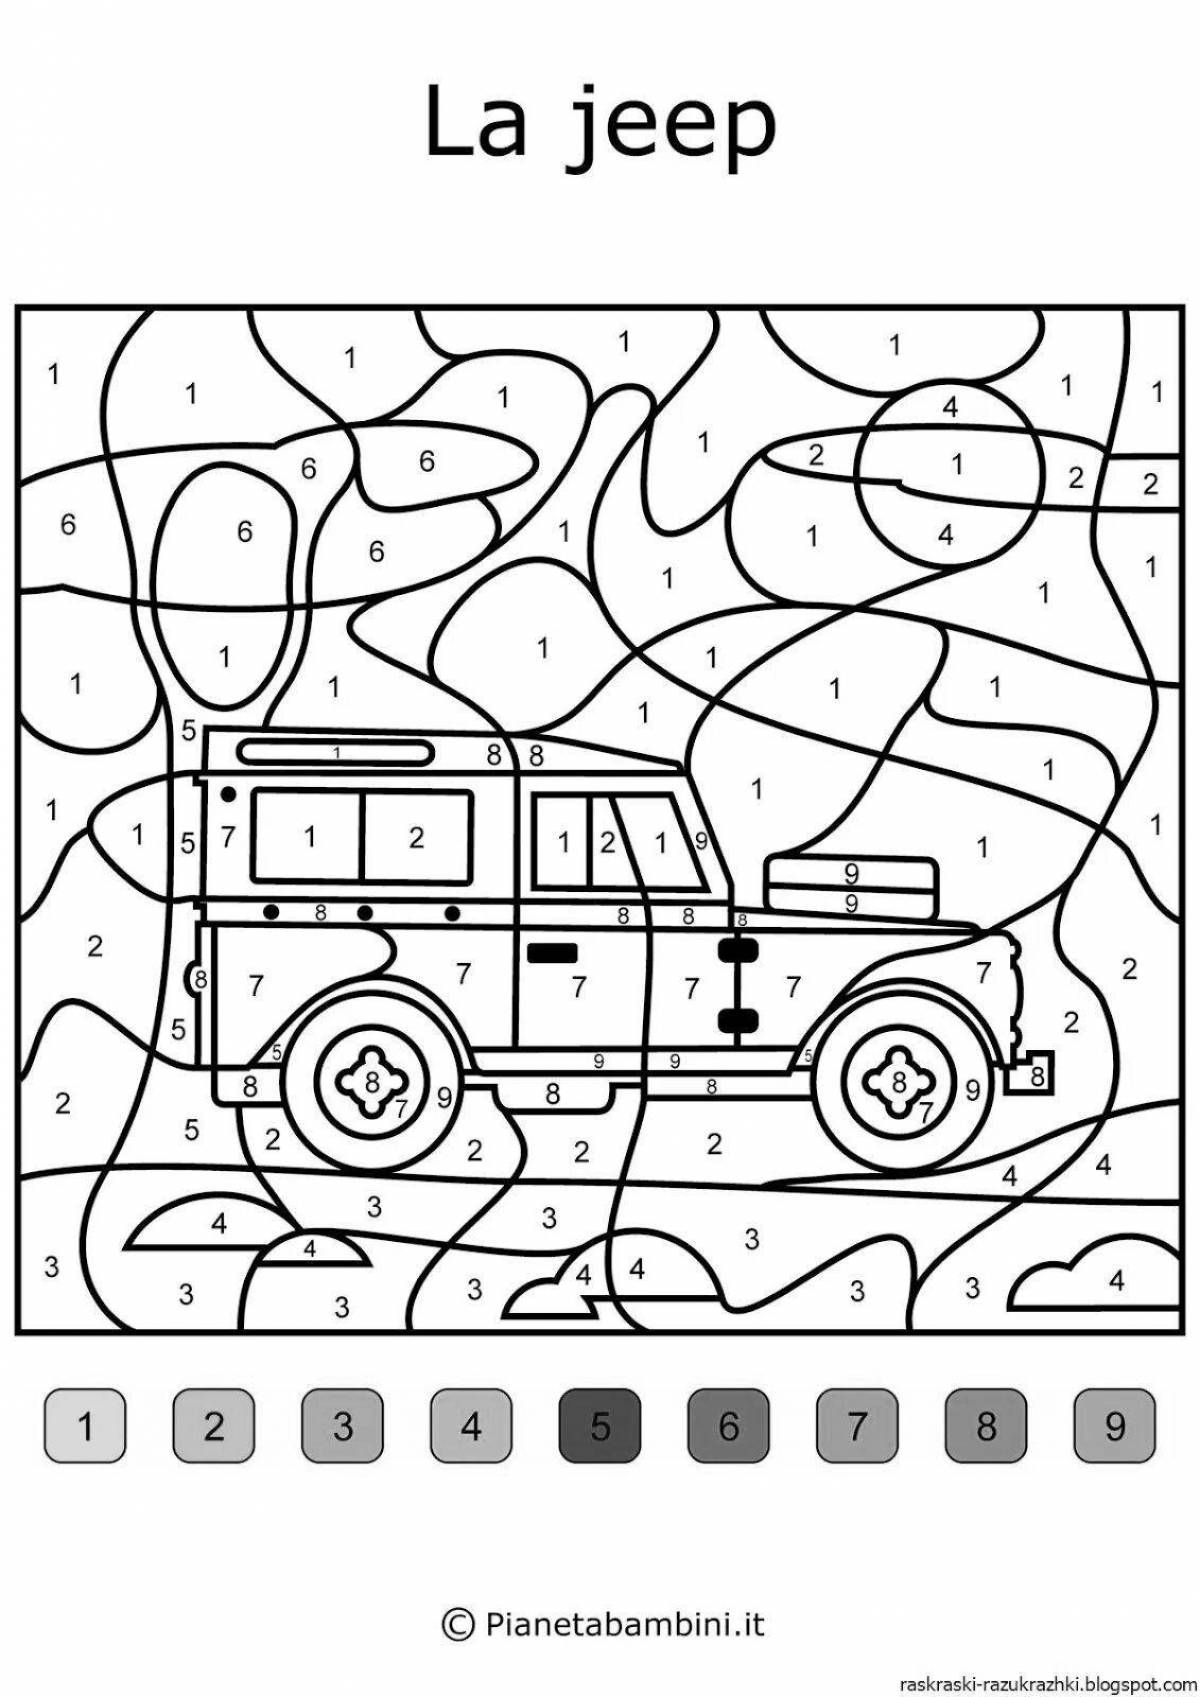 A fun digital coloring book for 6-7 year olds